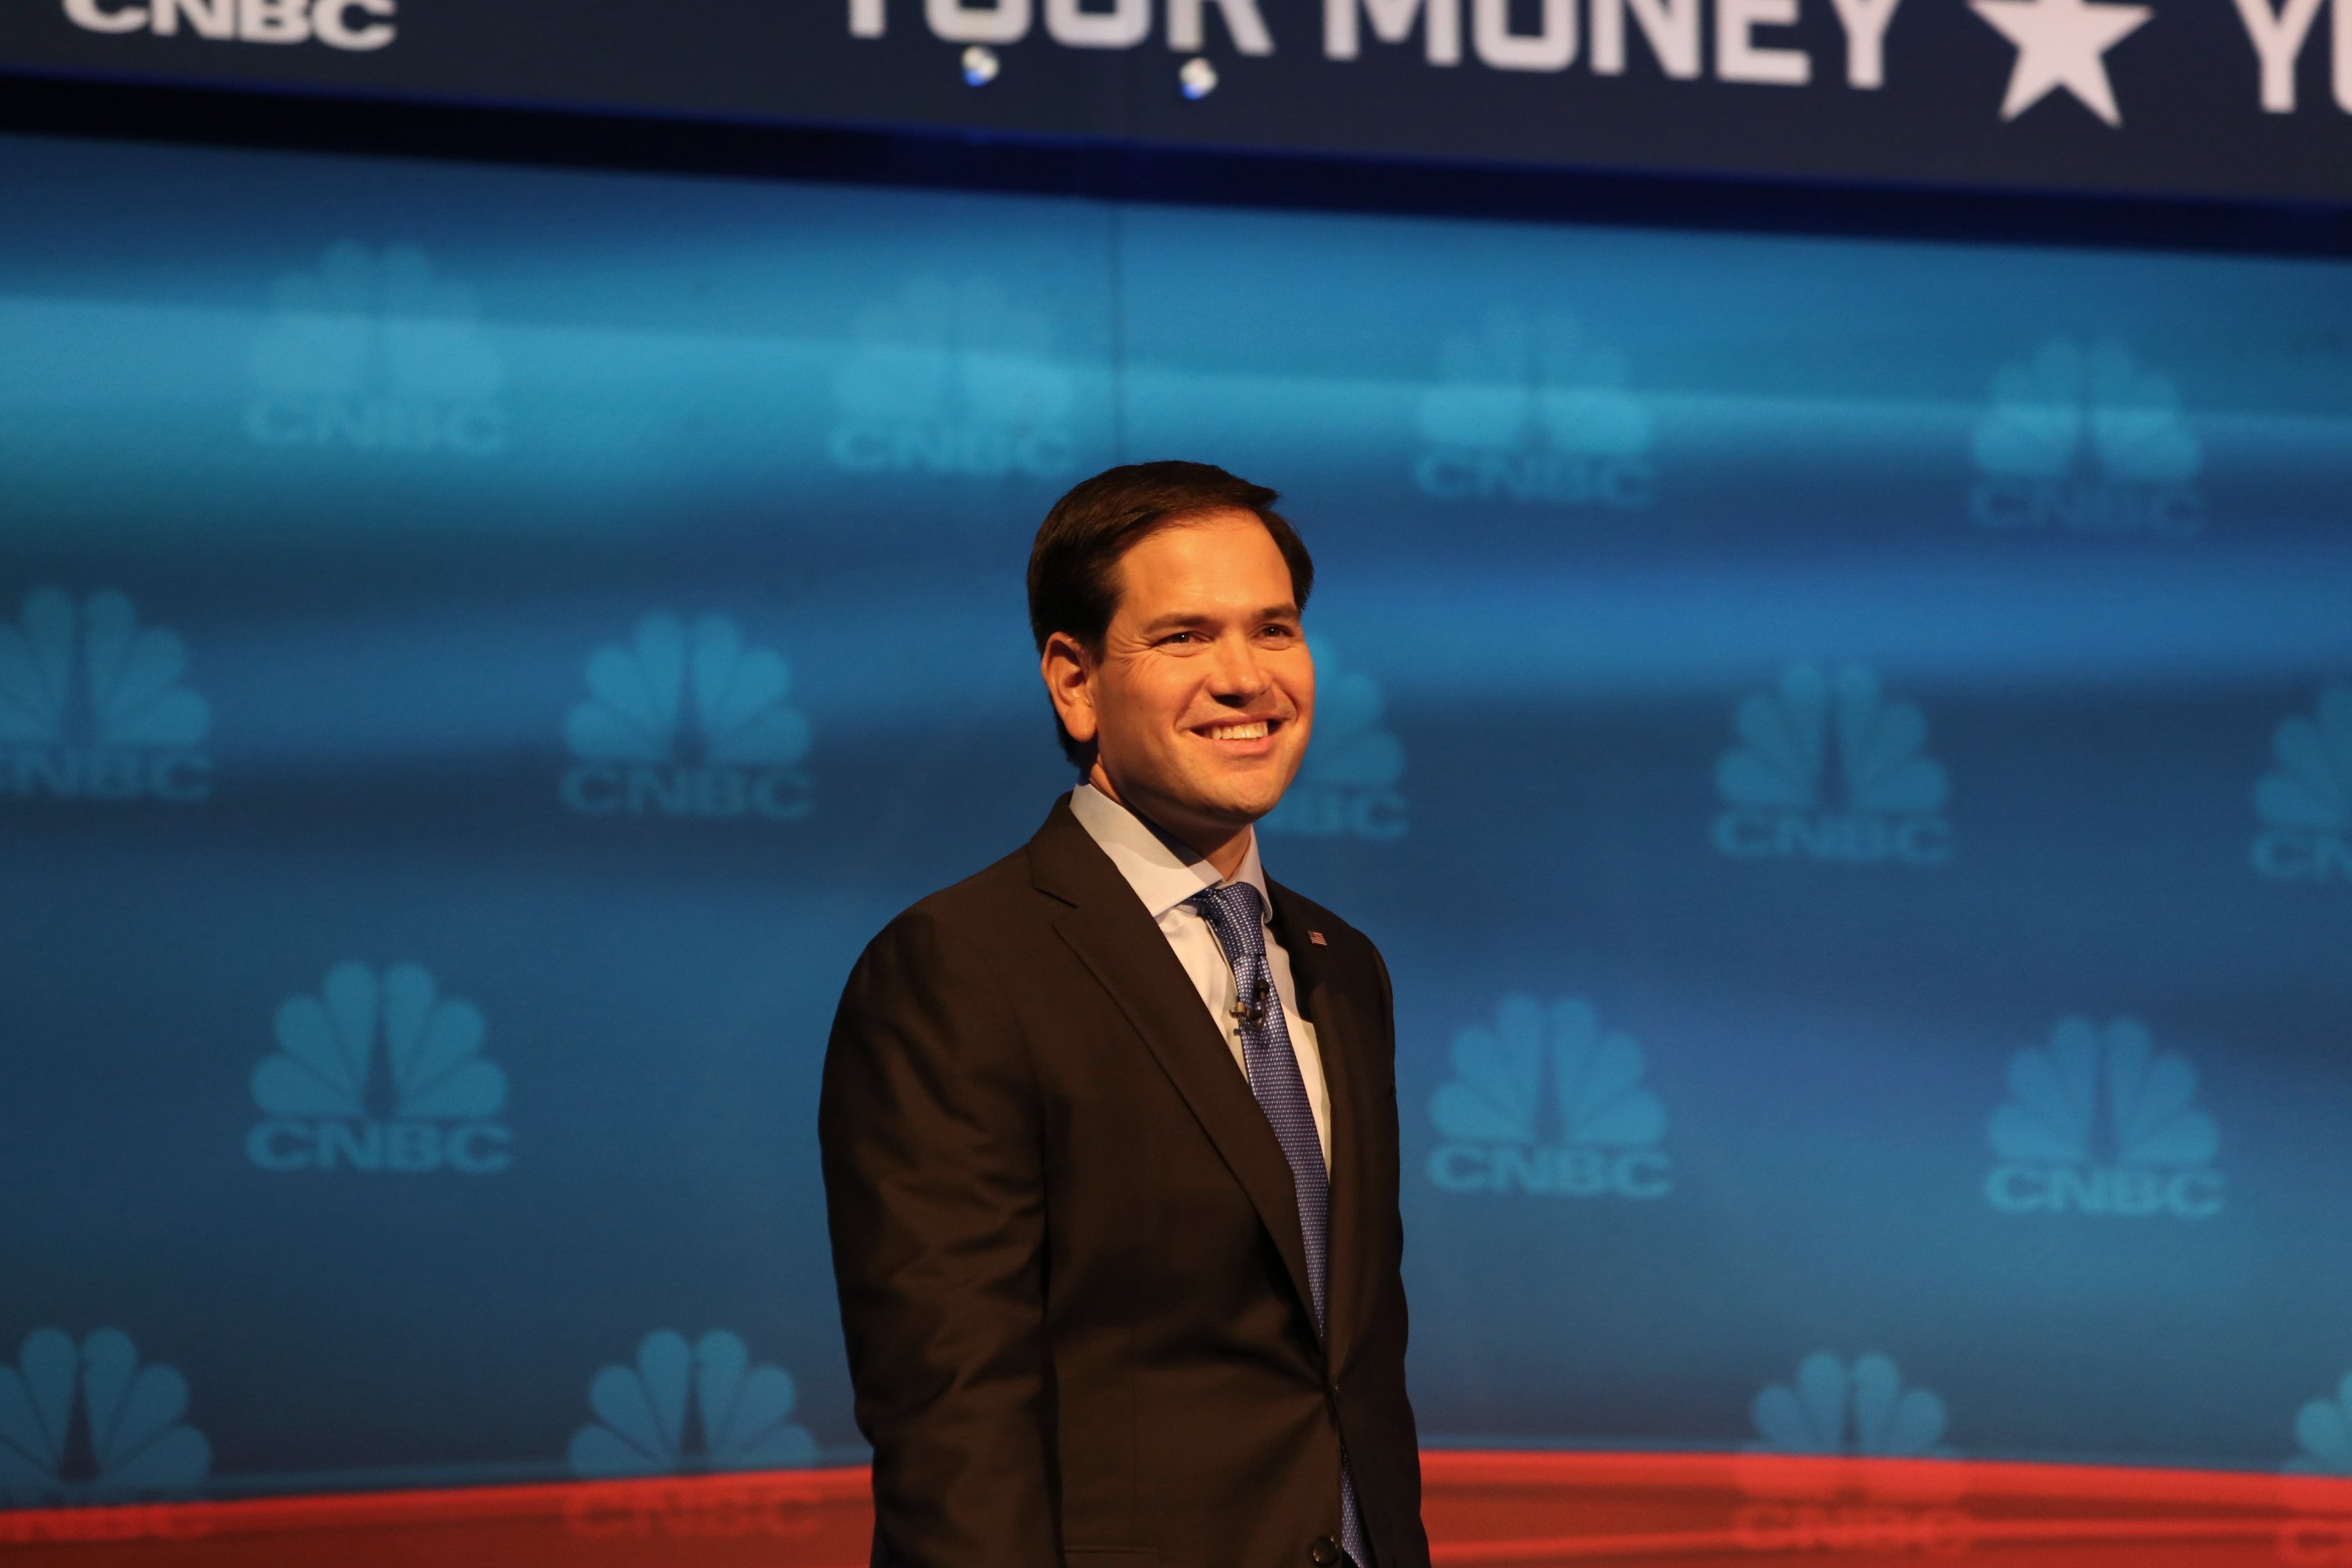 Marco Rubio participates in CNBC's "Your Money, Your Vote: The Republican Presidential Debate" live from the University of Colorado Boulder in Boulder, Colorado Wednesday, October 28th